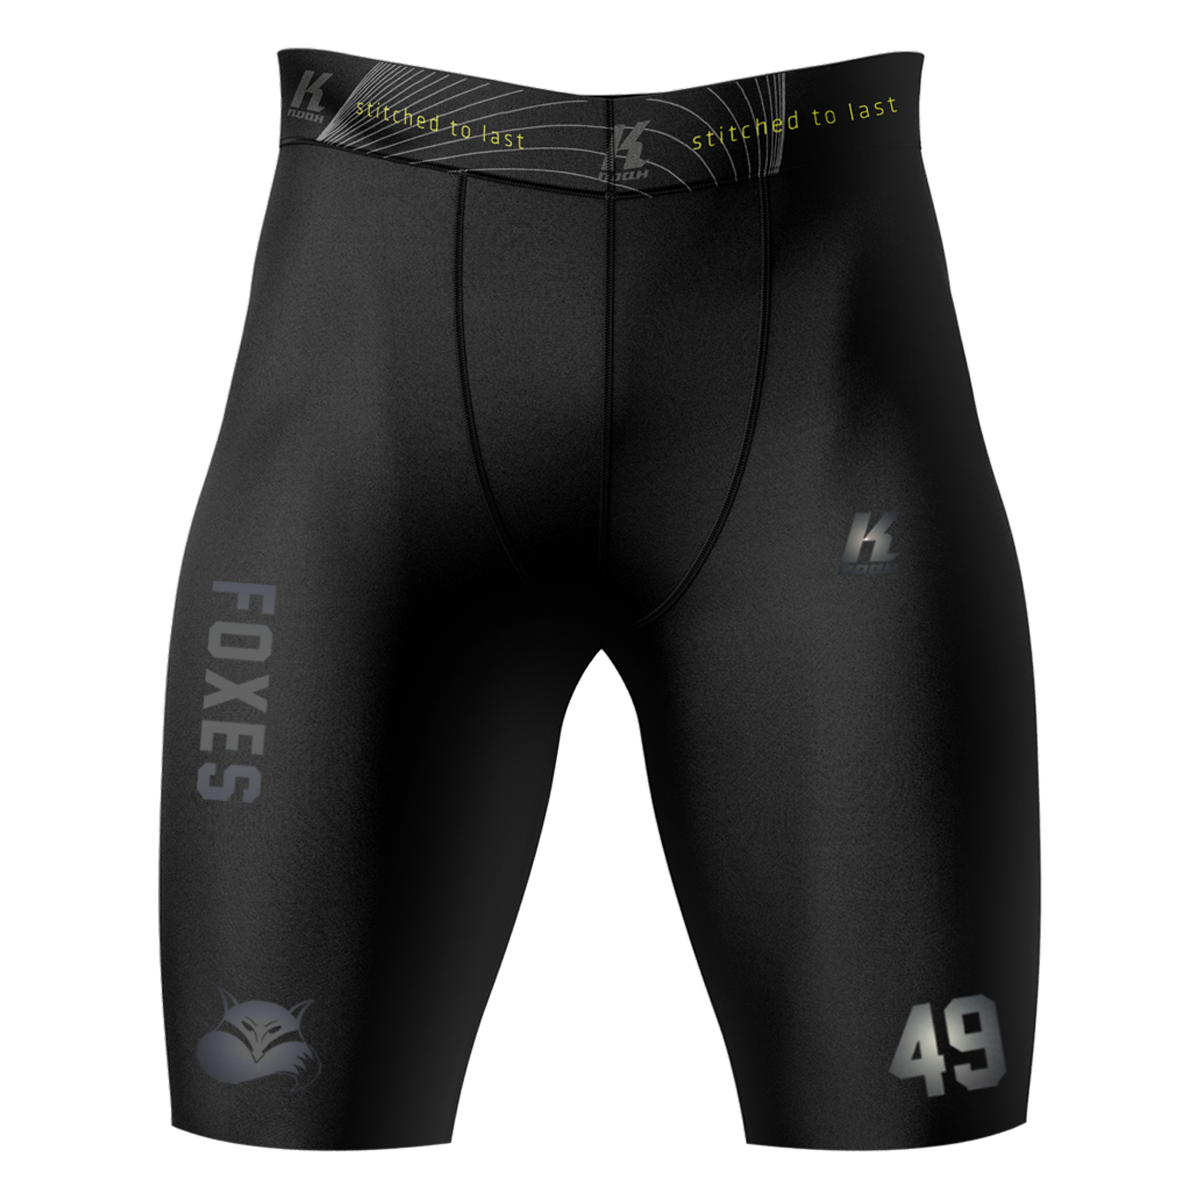 Foxes "Blackline" K.Tech Fiber Compression Pant BA0512 with Playernumber/Initials